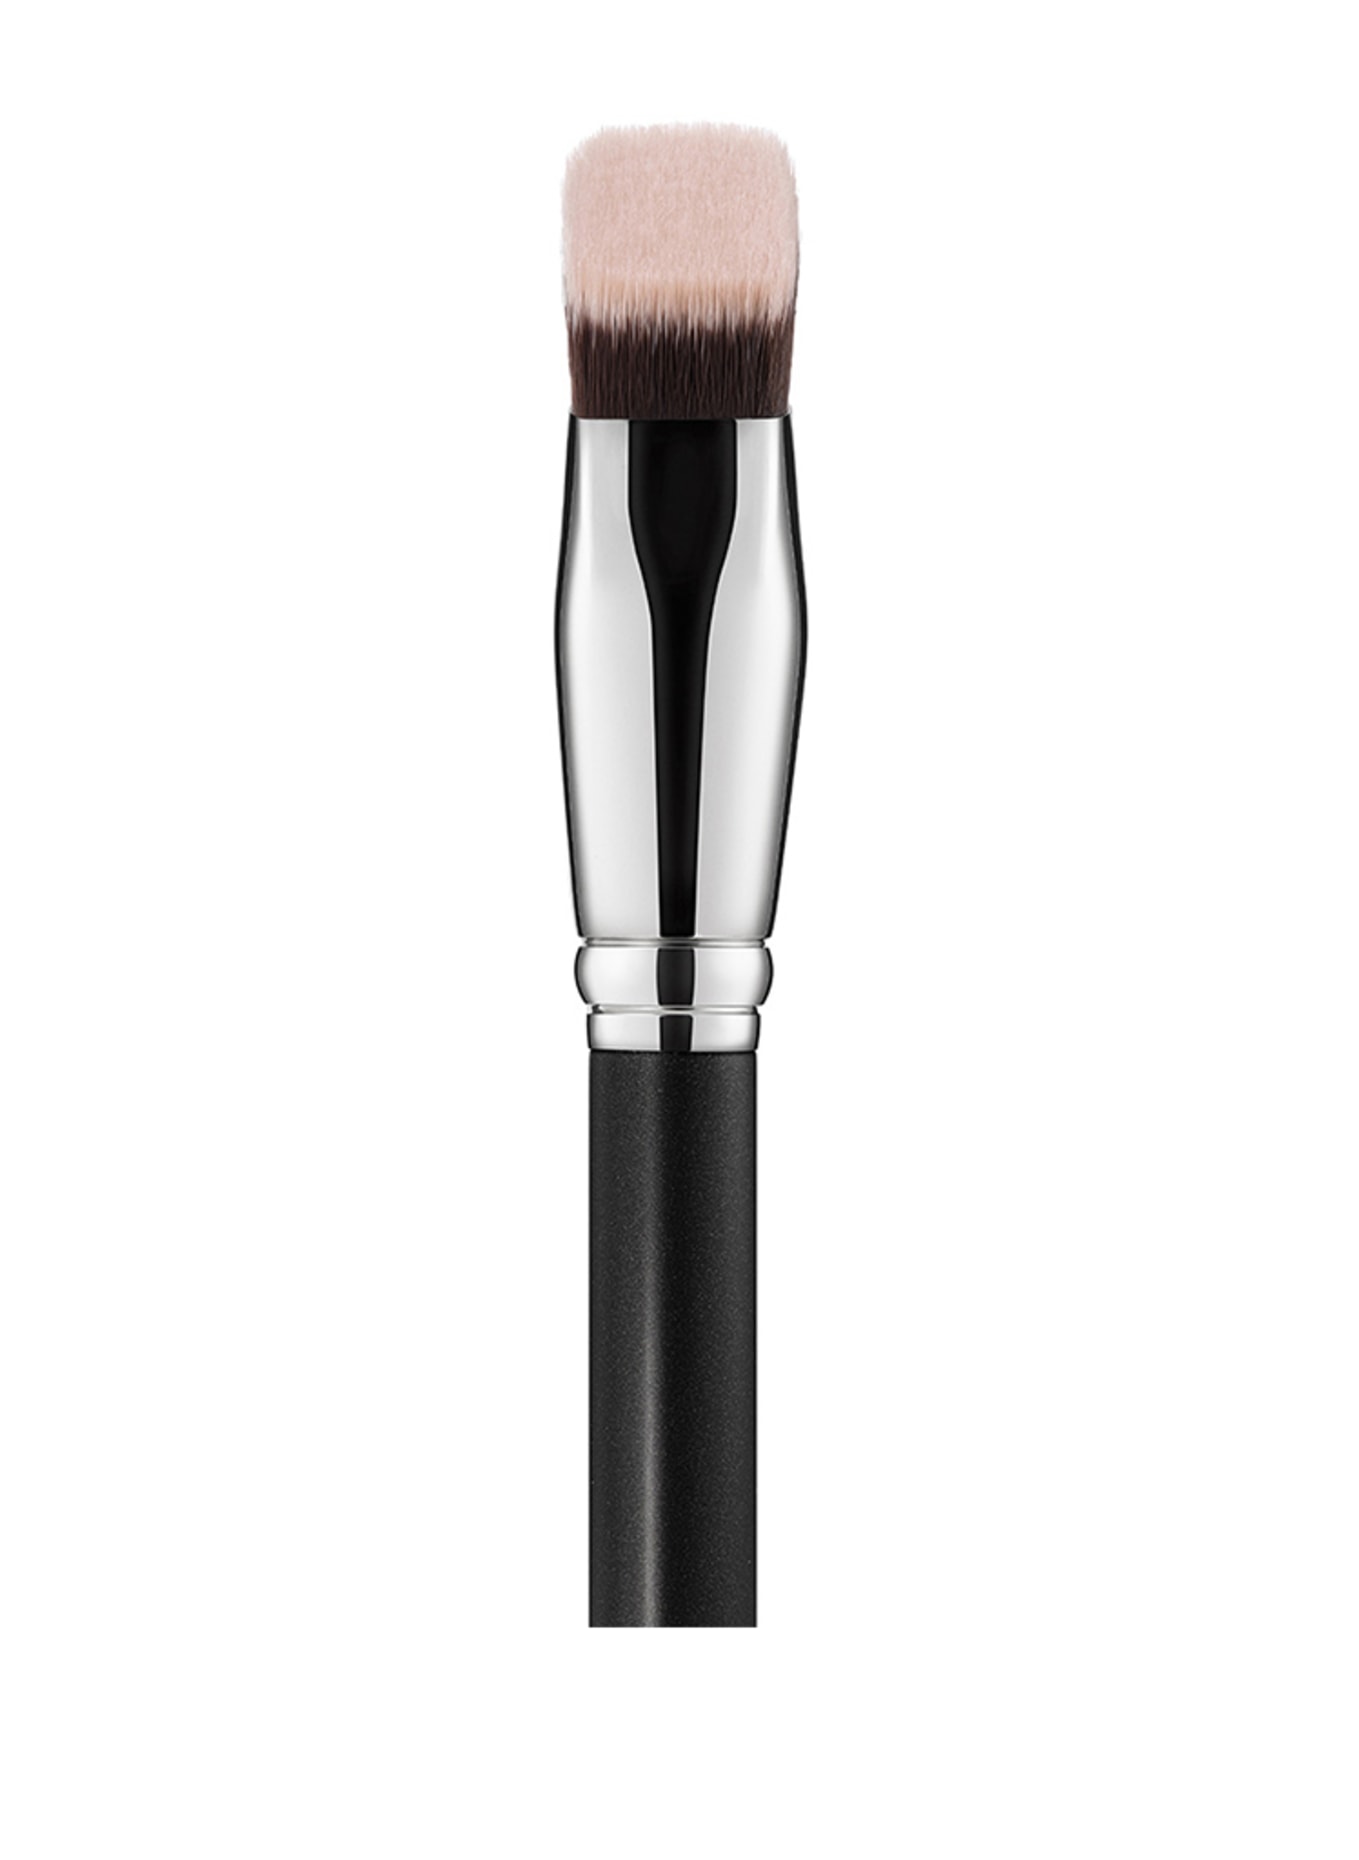 M.A.C SMOOTHE EDGE ALL OVER FACE BRUSH (Obrazek 3)